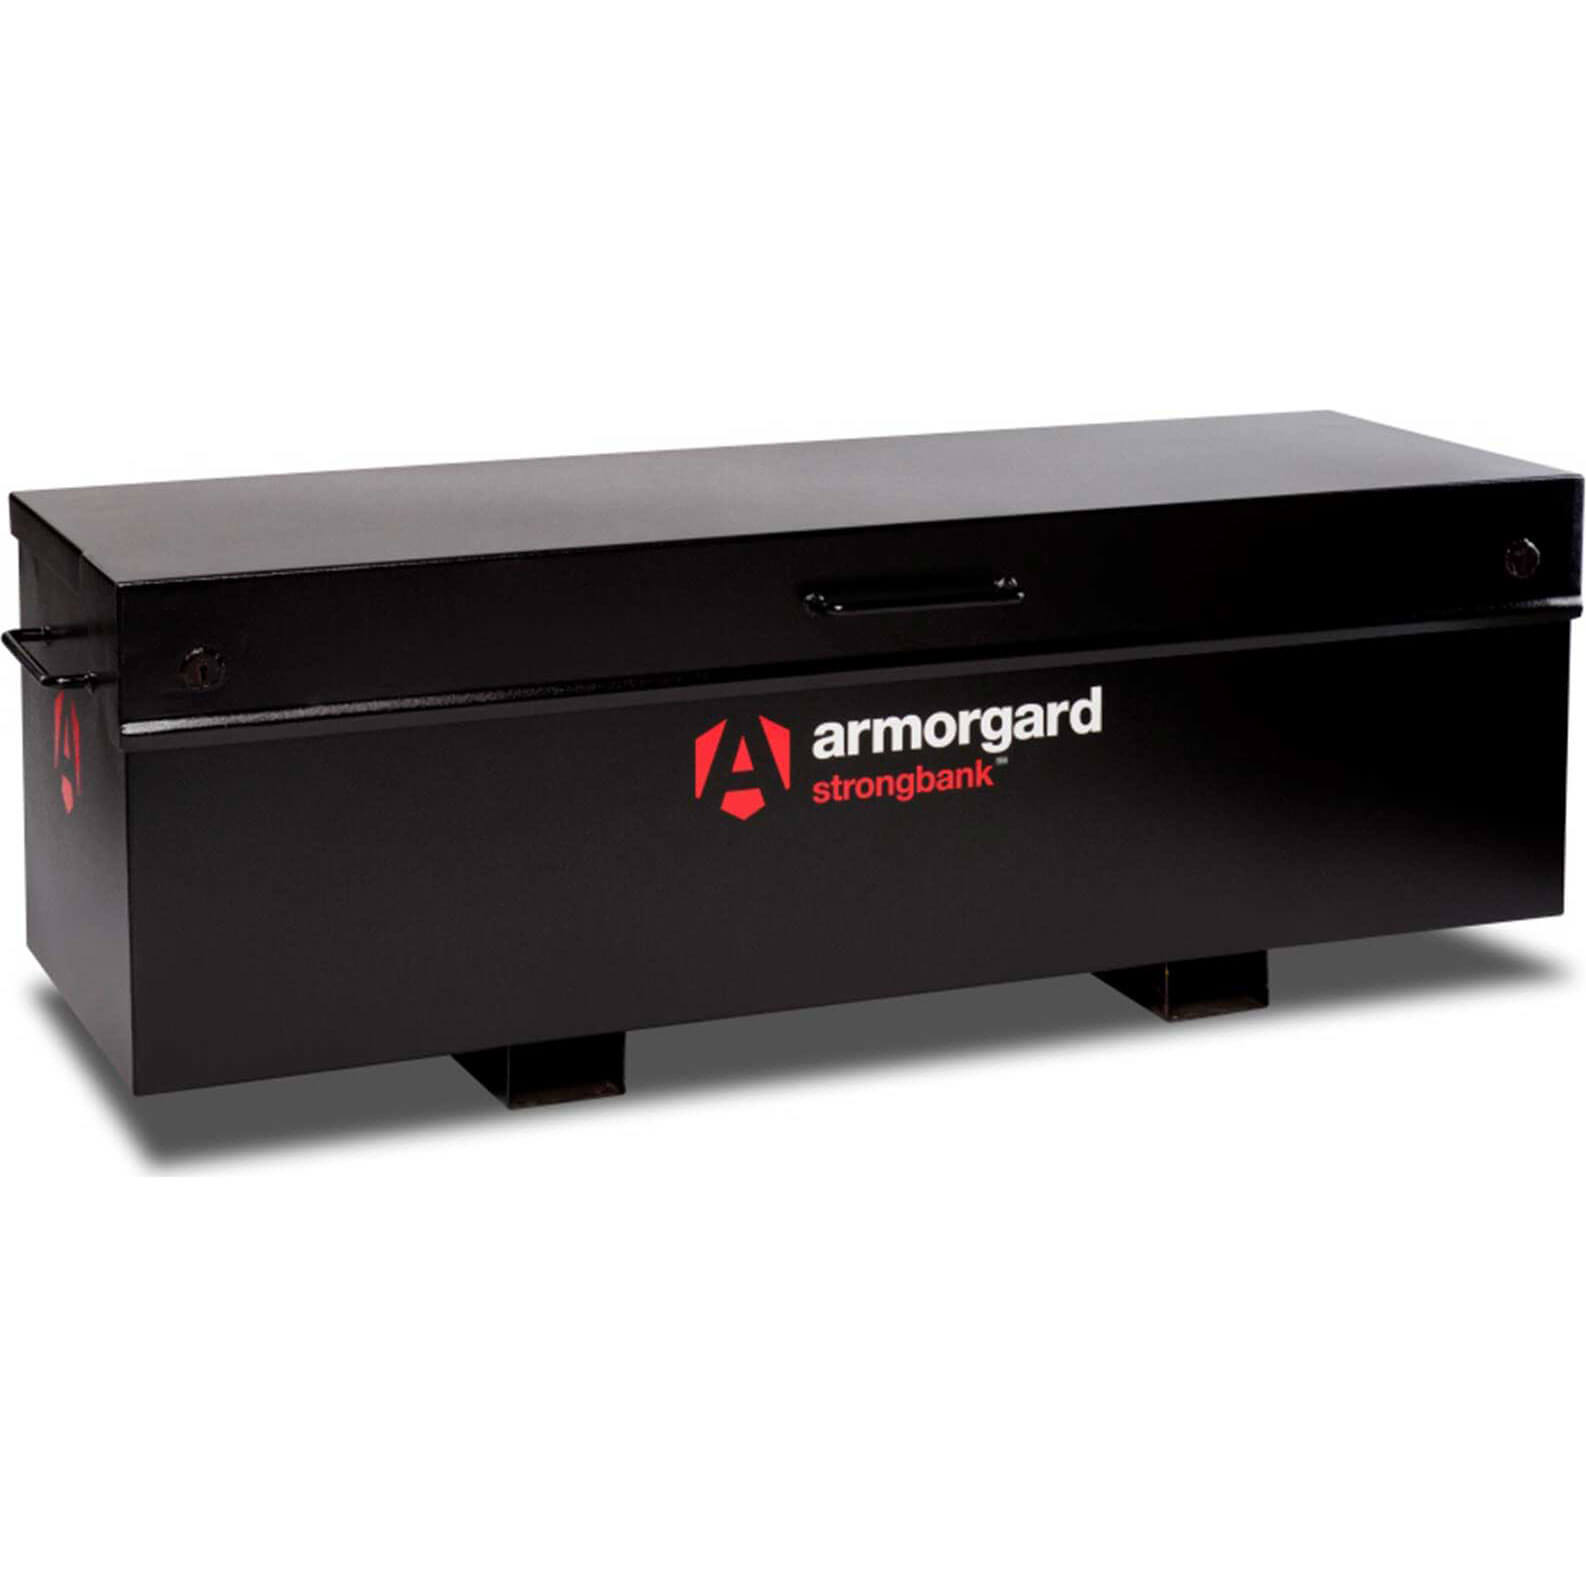 Image of Armorgard Strongbank Secure Truck Storage Box 2000mm 690mm 665mm